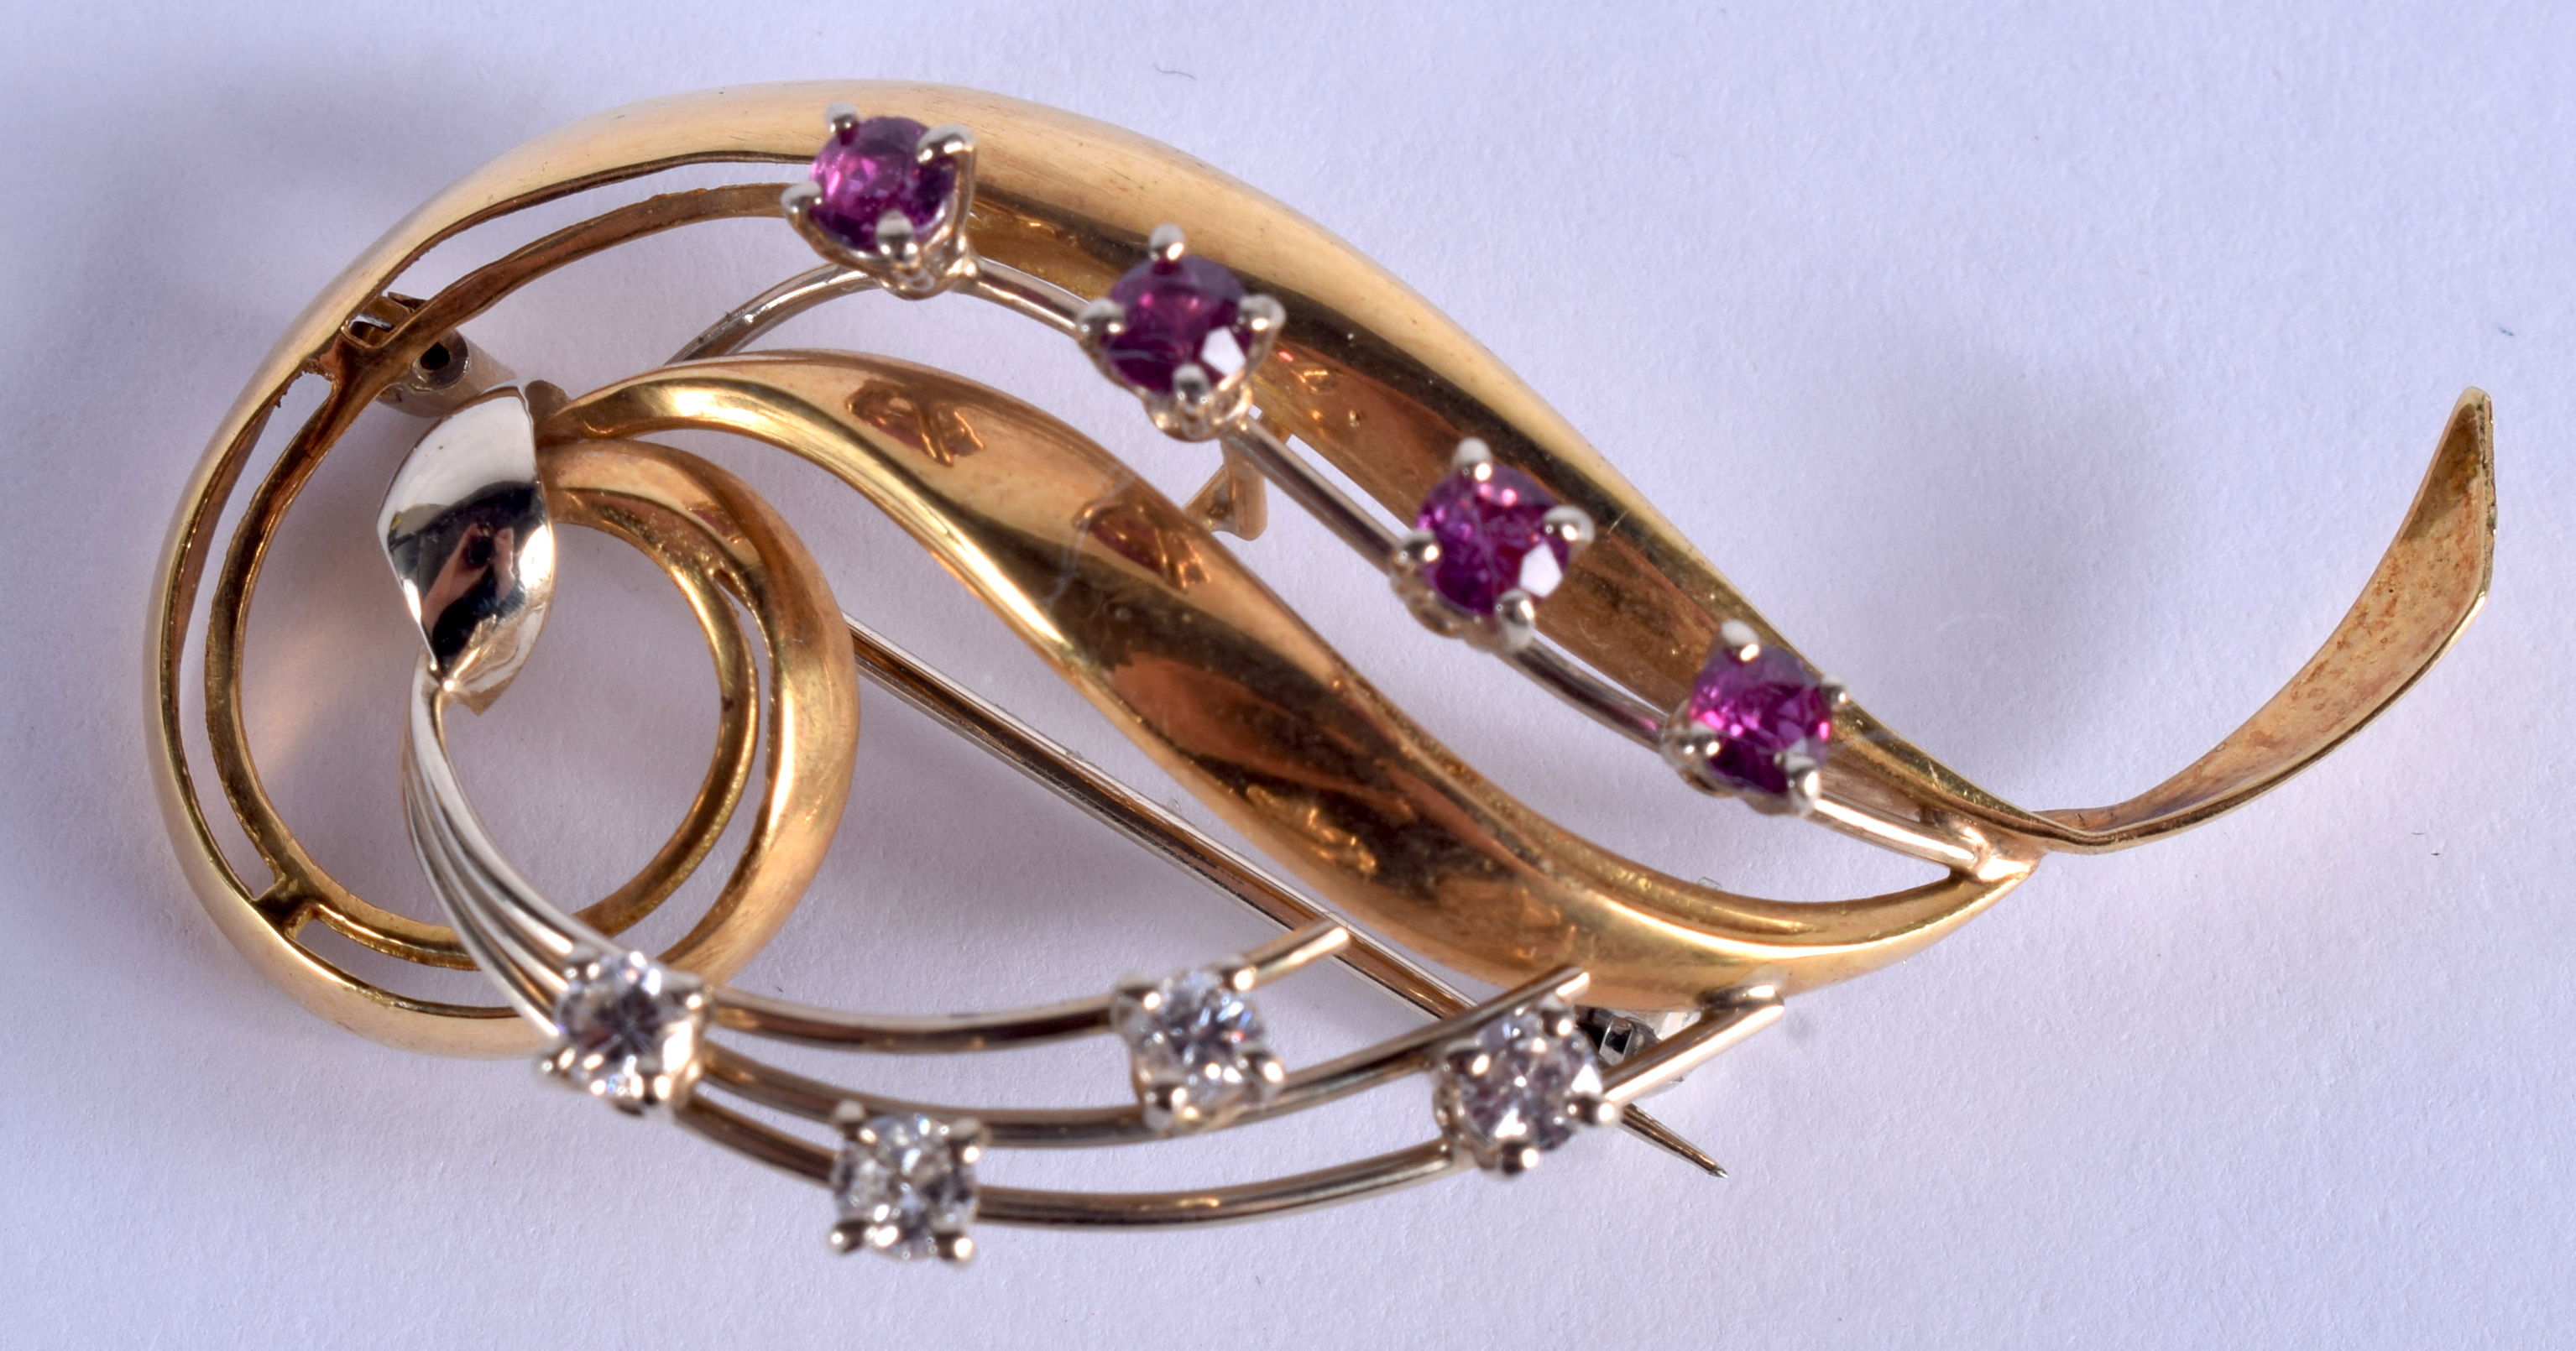 AN ANTIQUE 15CT GOLD DIAMOND AND RUBY BROOCH. 7.7 grams. 5.5 cm x 2.5 cm.